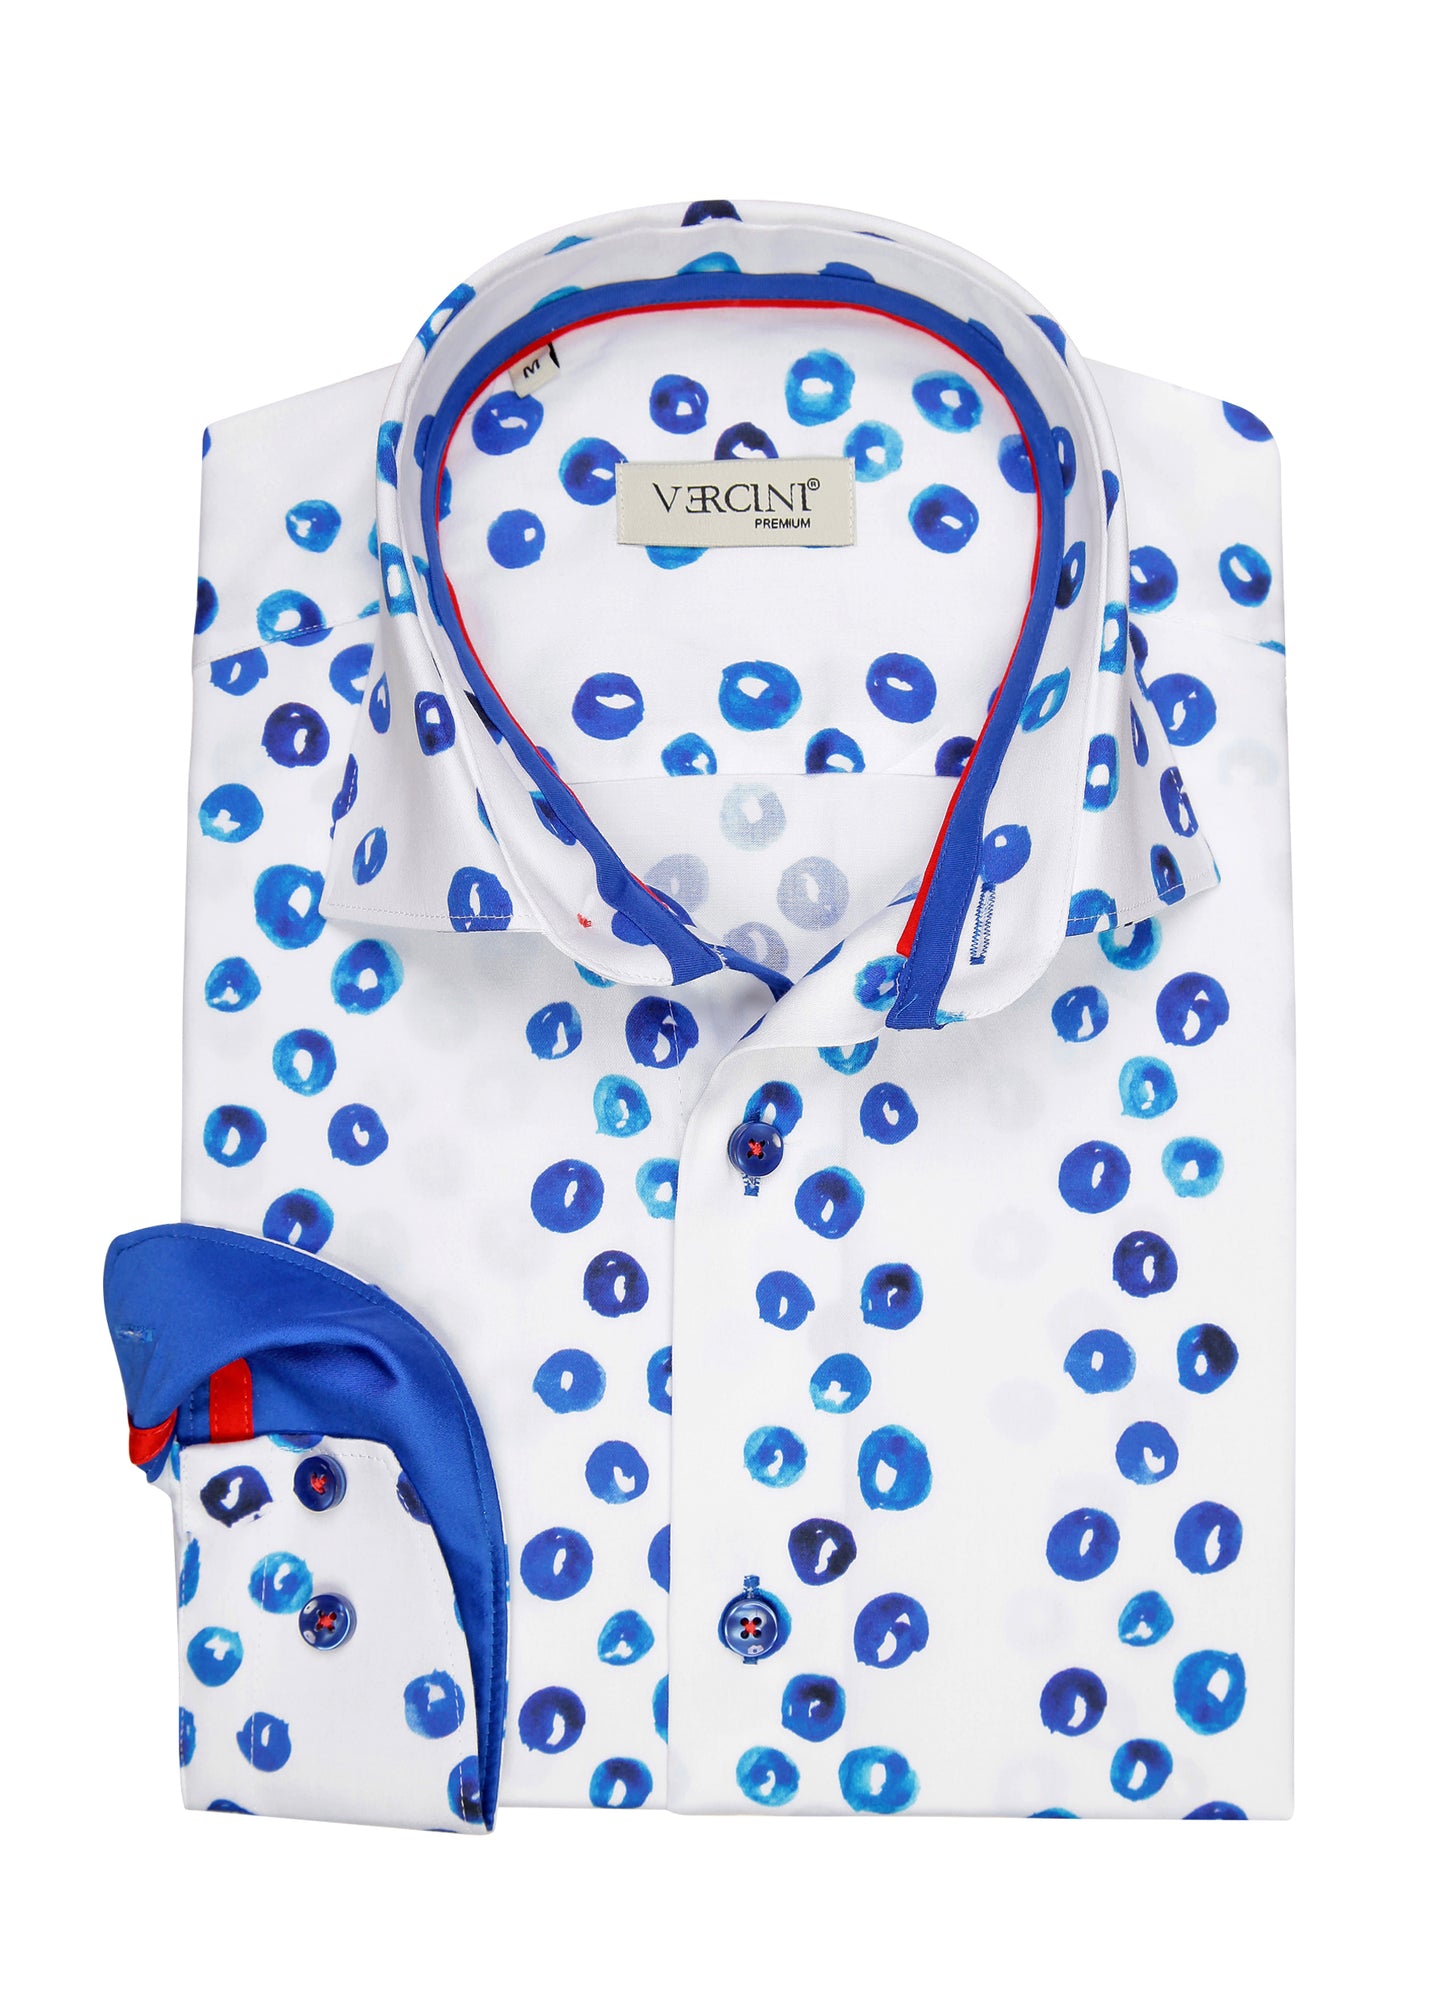 white shirt with blue circles CASUAL SHIRT On Sale 30% Off Vercini